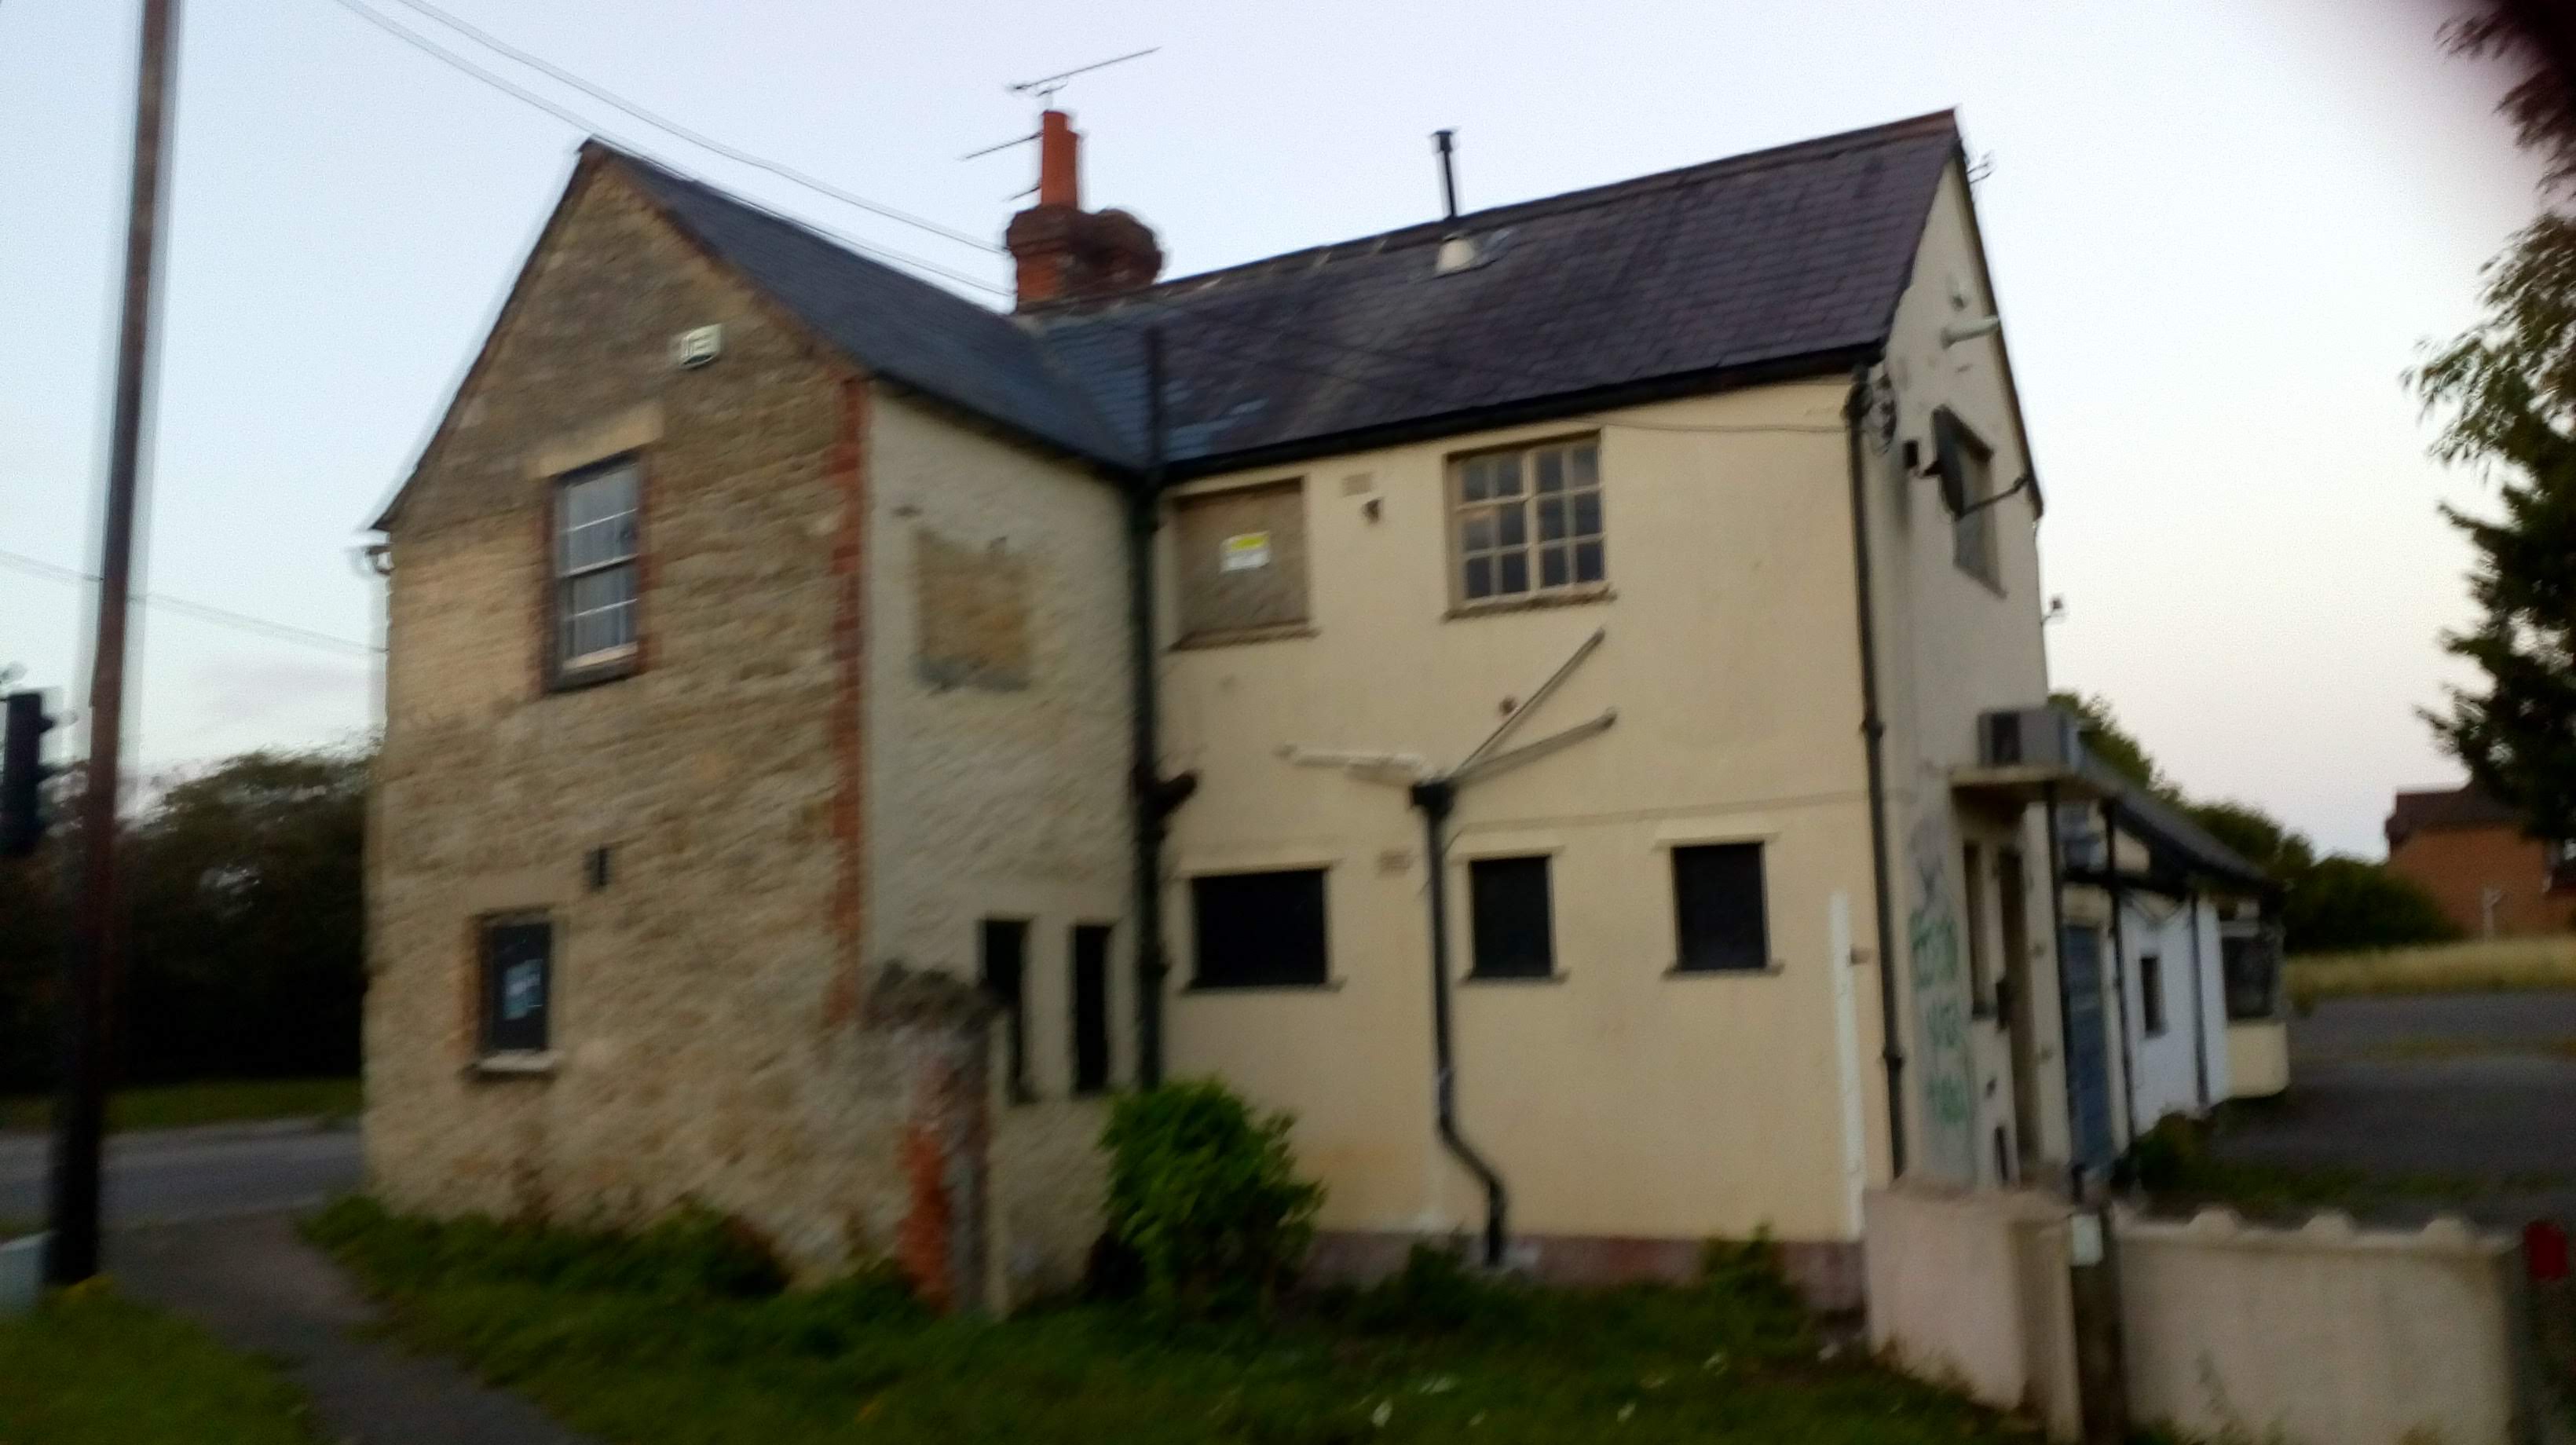 photo of the pub from the right hand side